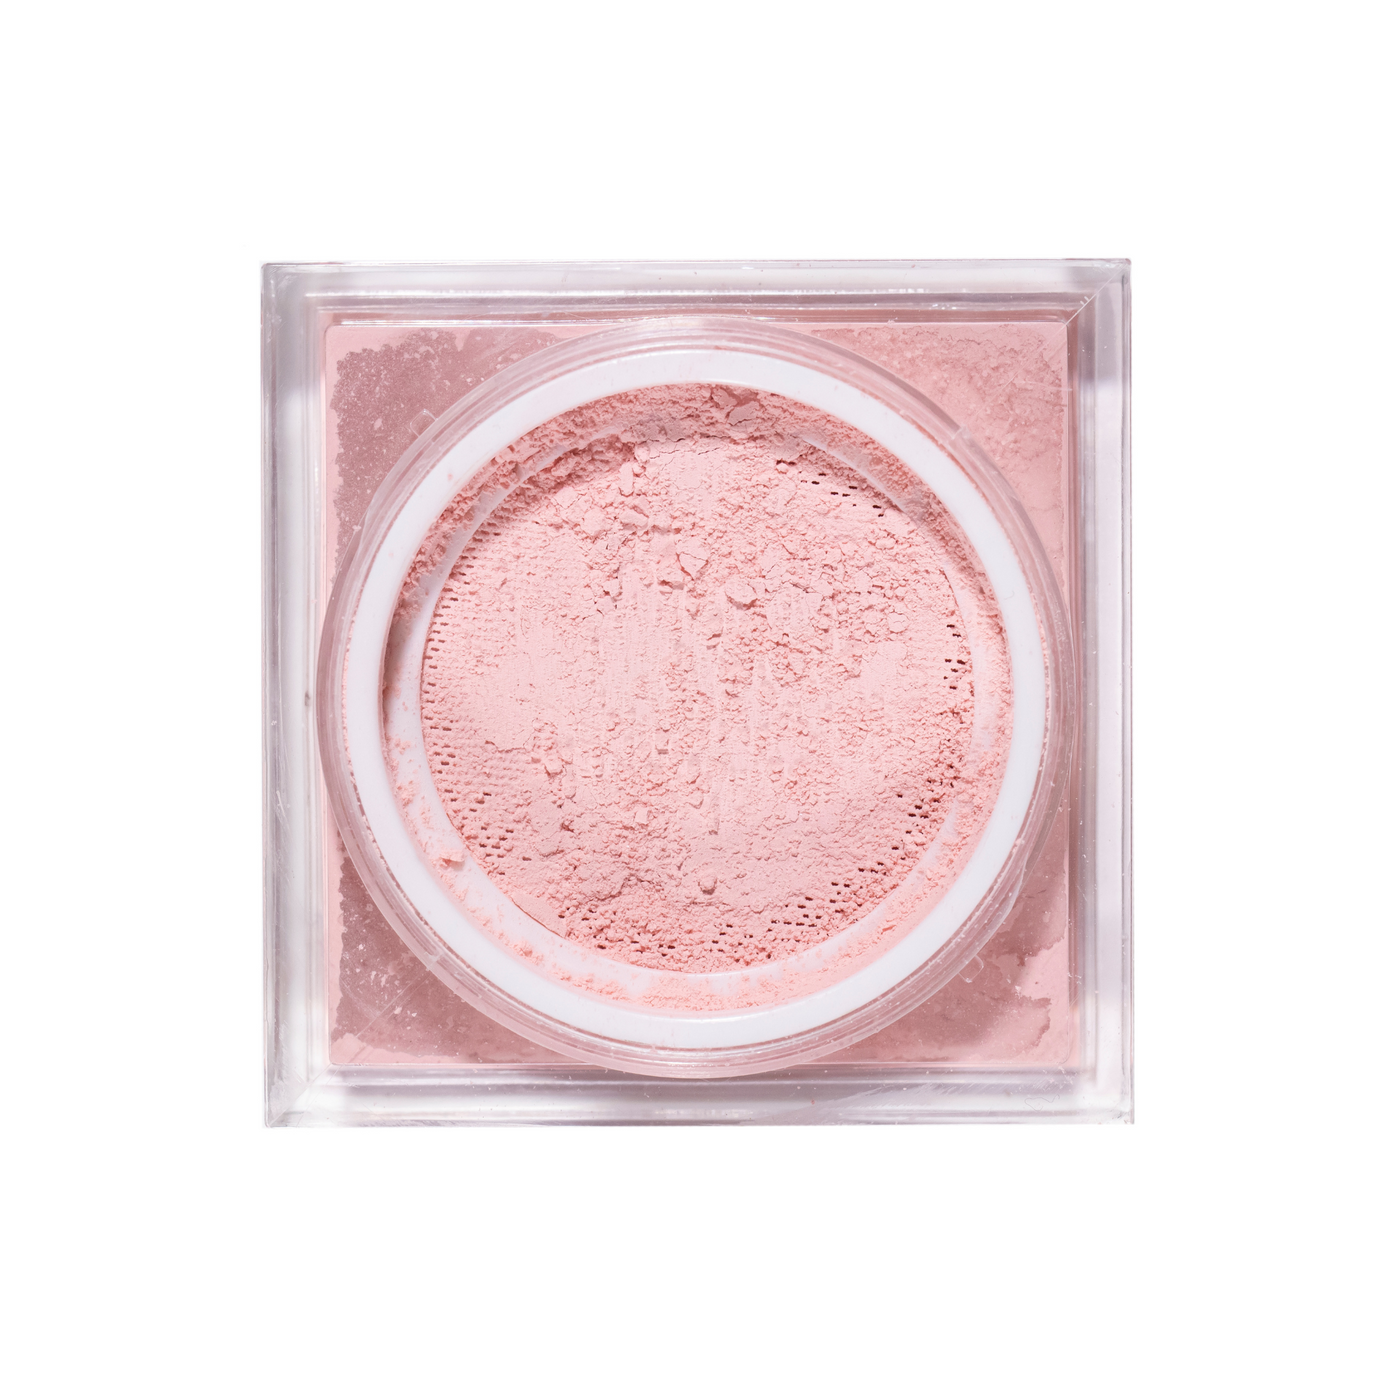 BPerfect x Katie Daley - Powder and Puff Duo